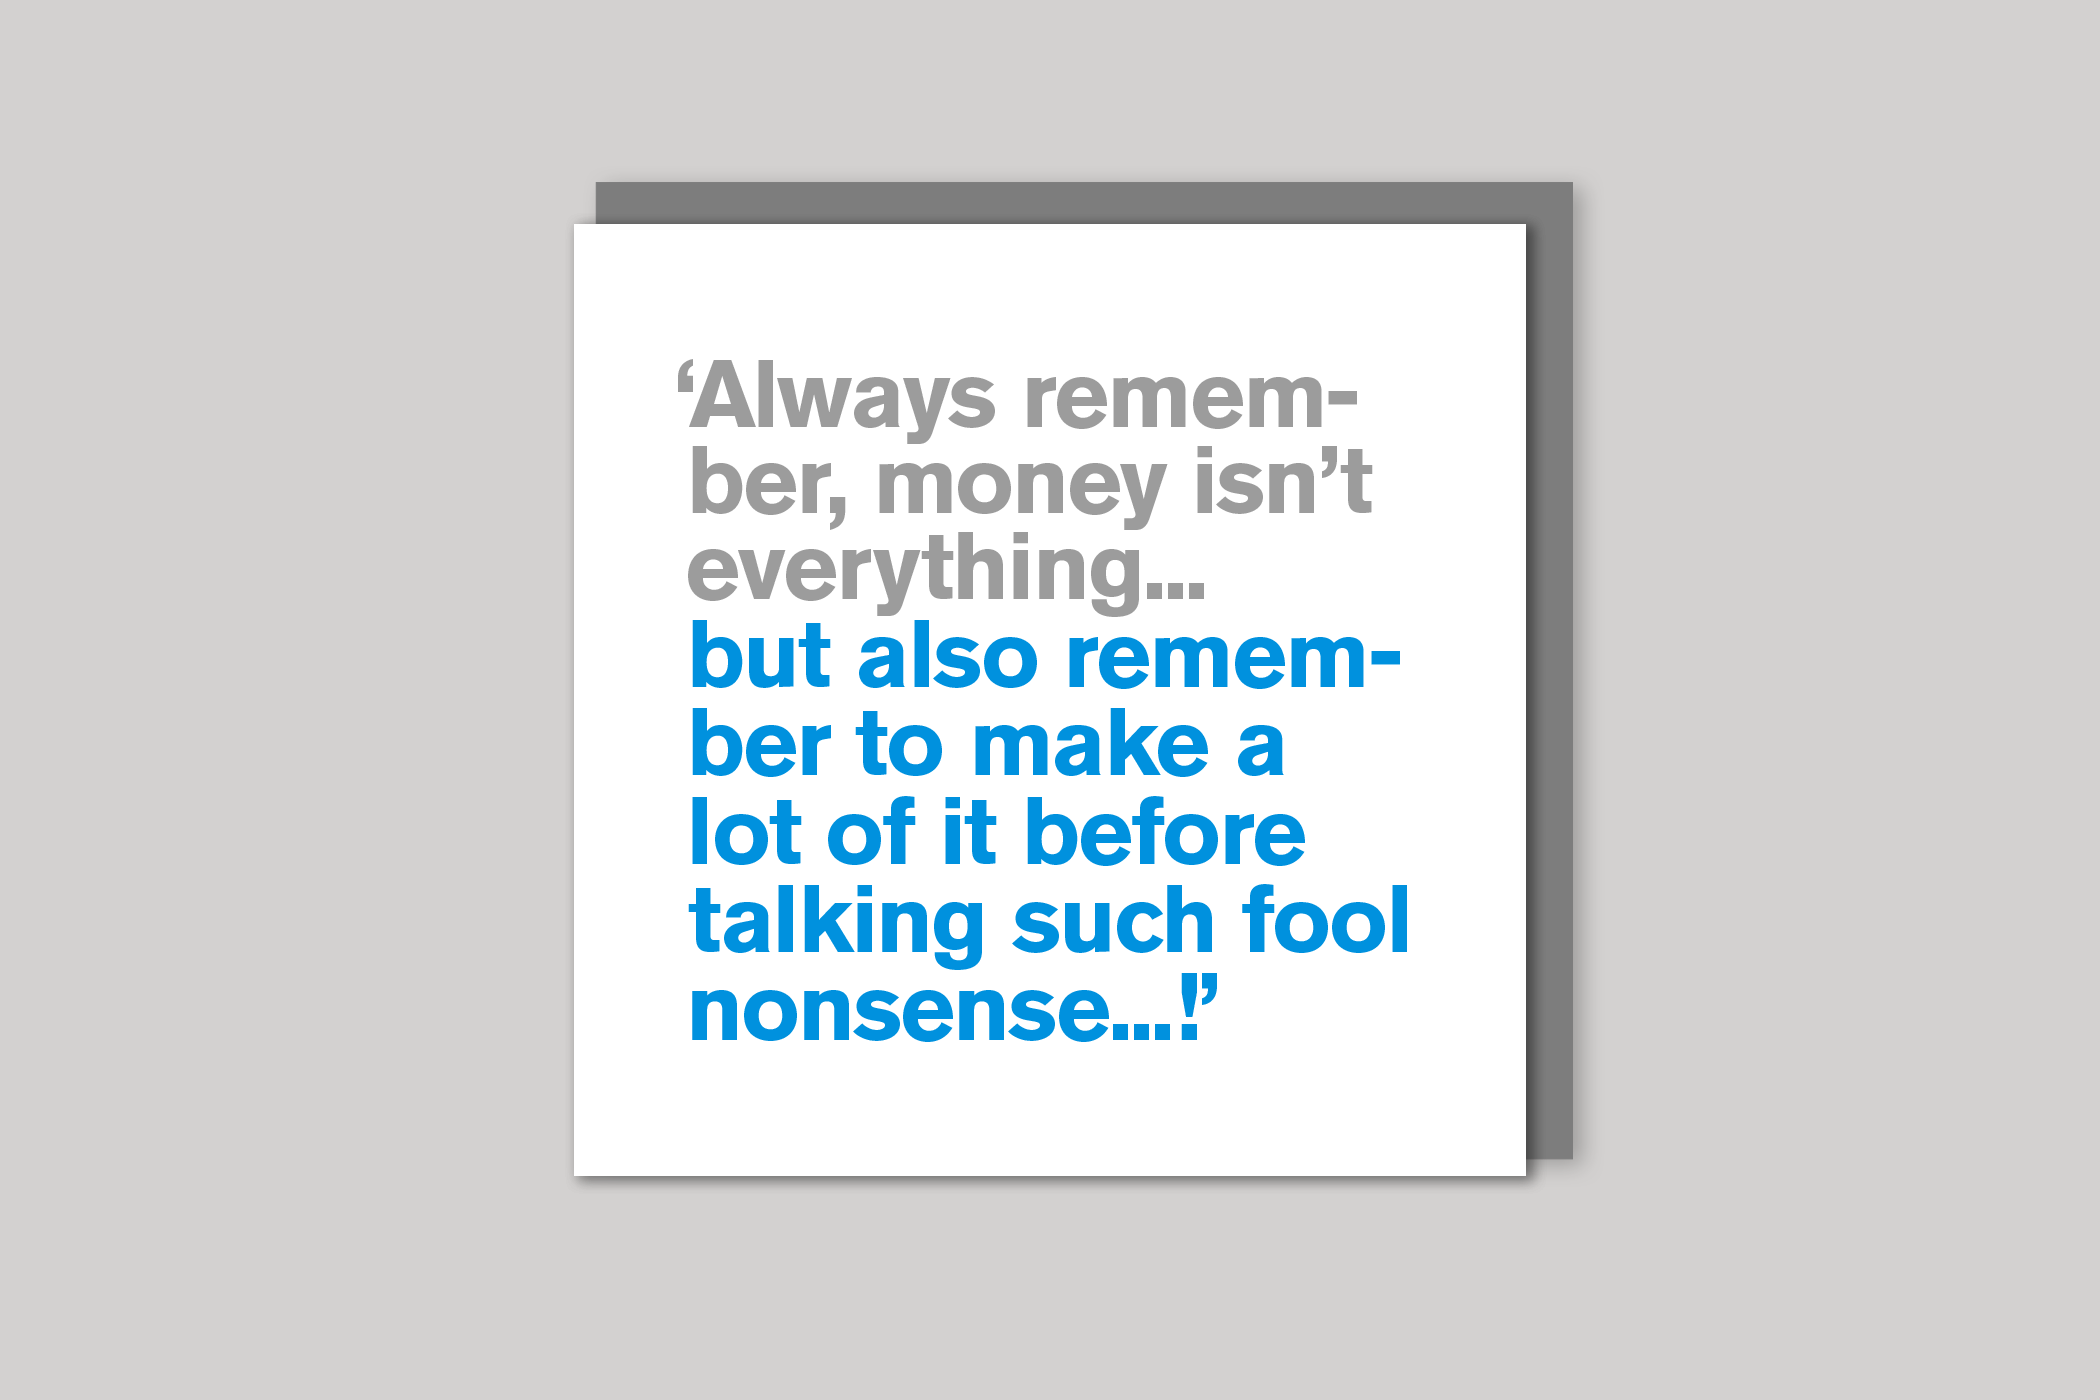 Money Isn't Everything from Lyric range of quotation cards by Icon, back page.